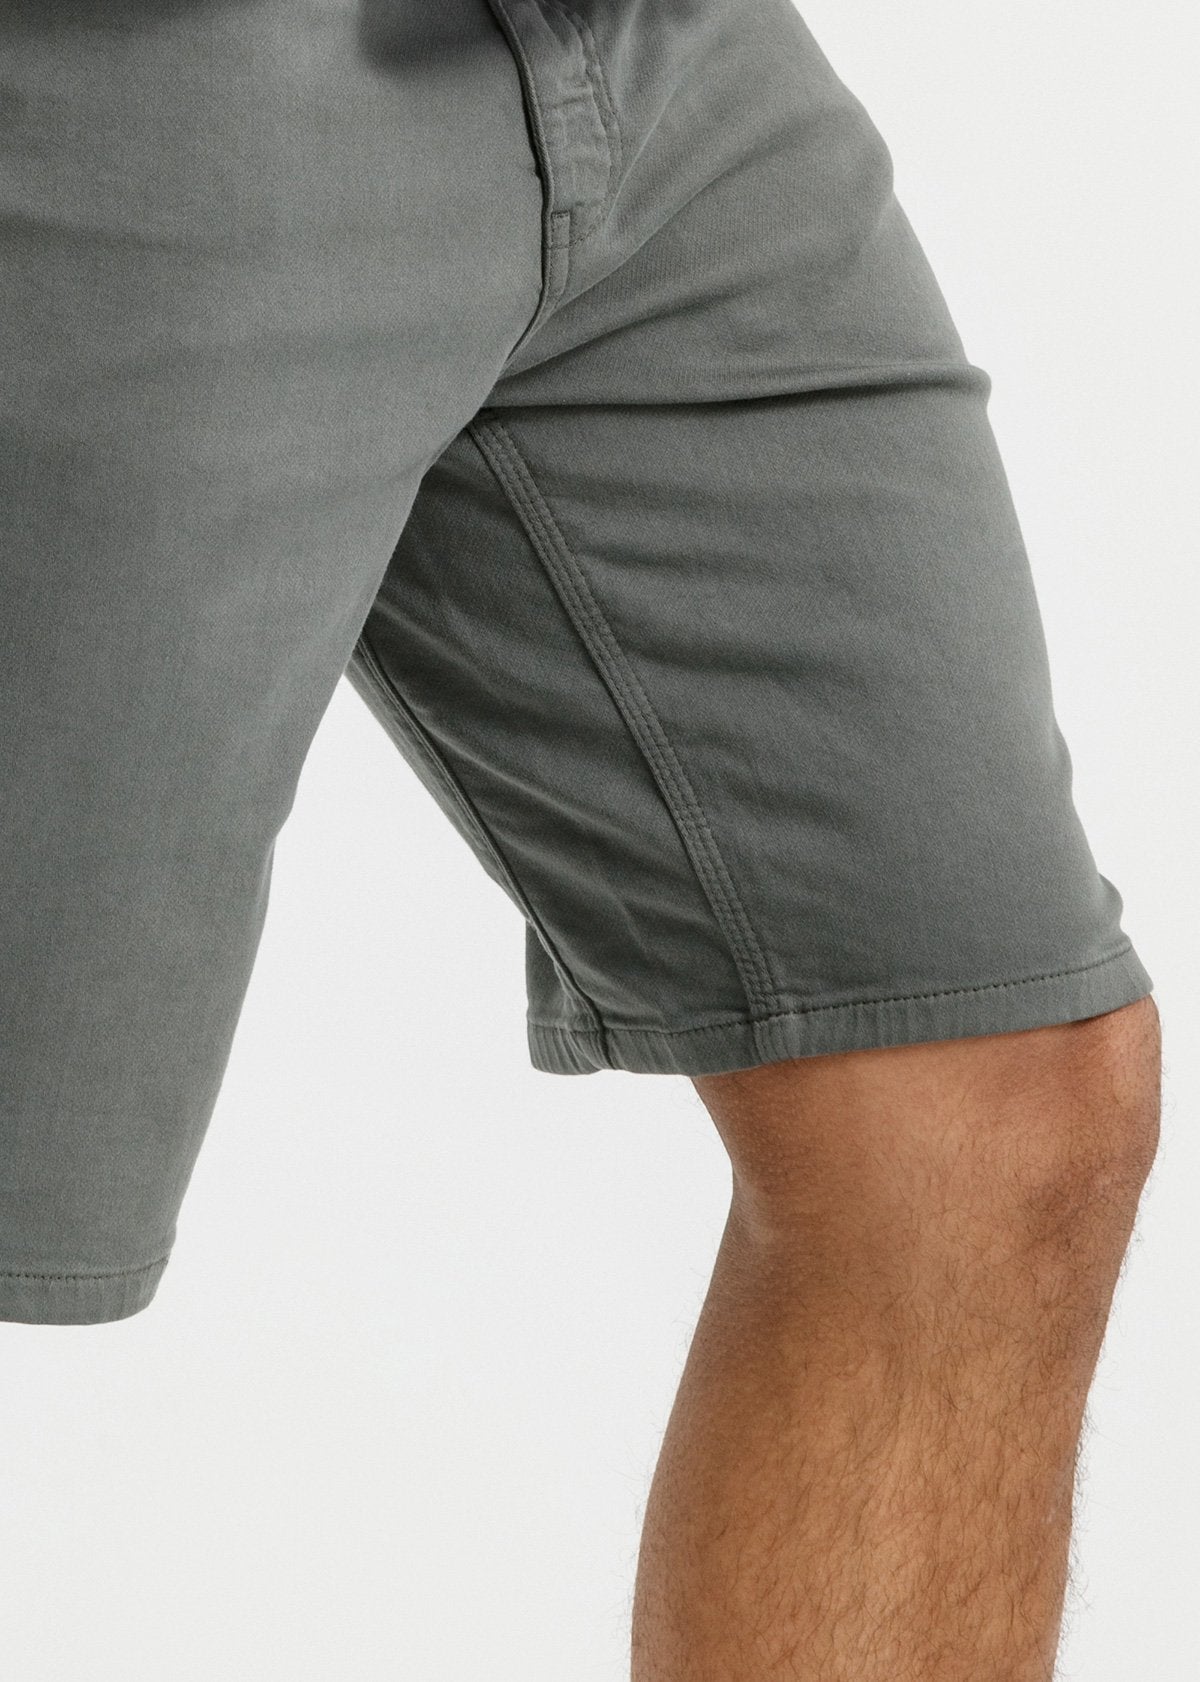 Men's Relaxed Fit Performance Short